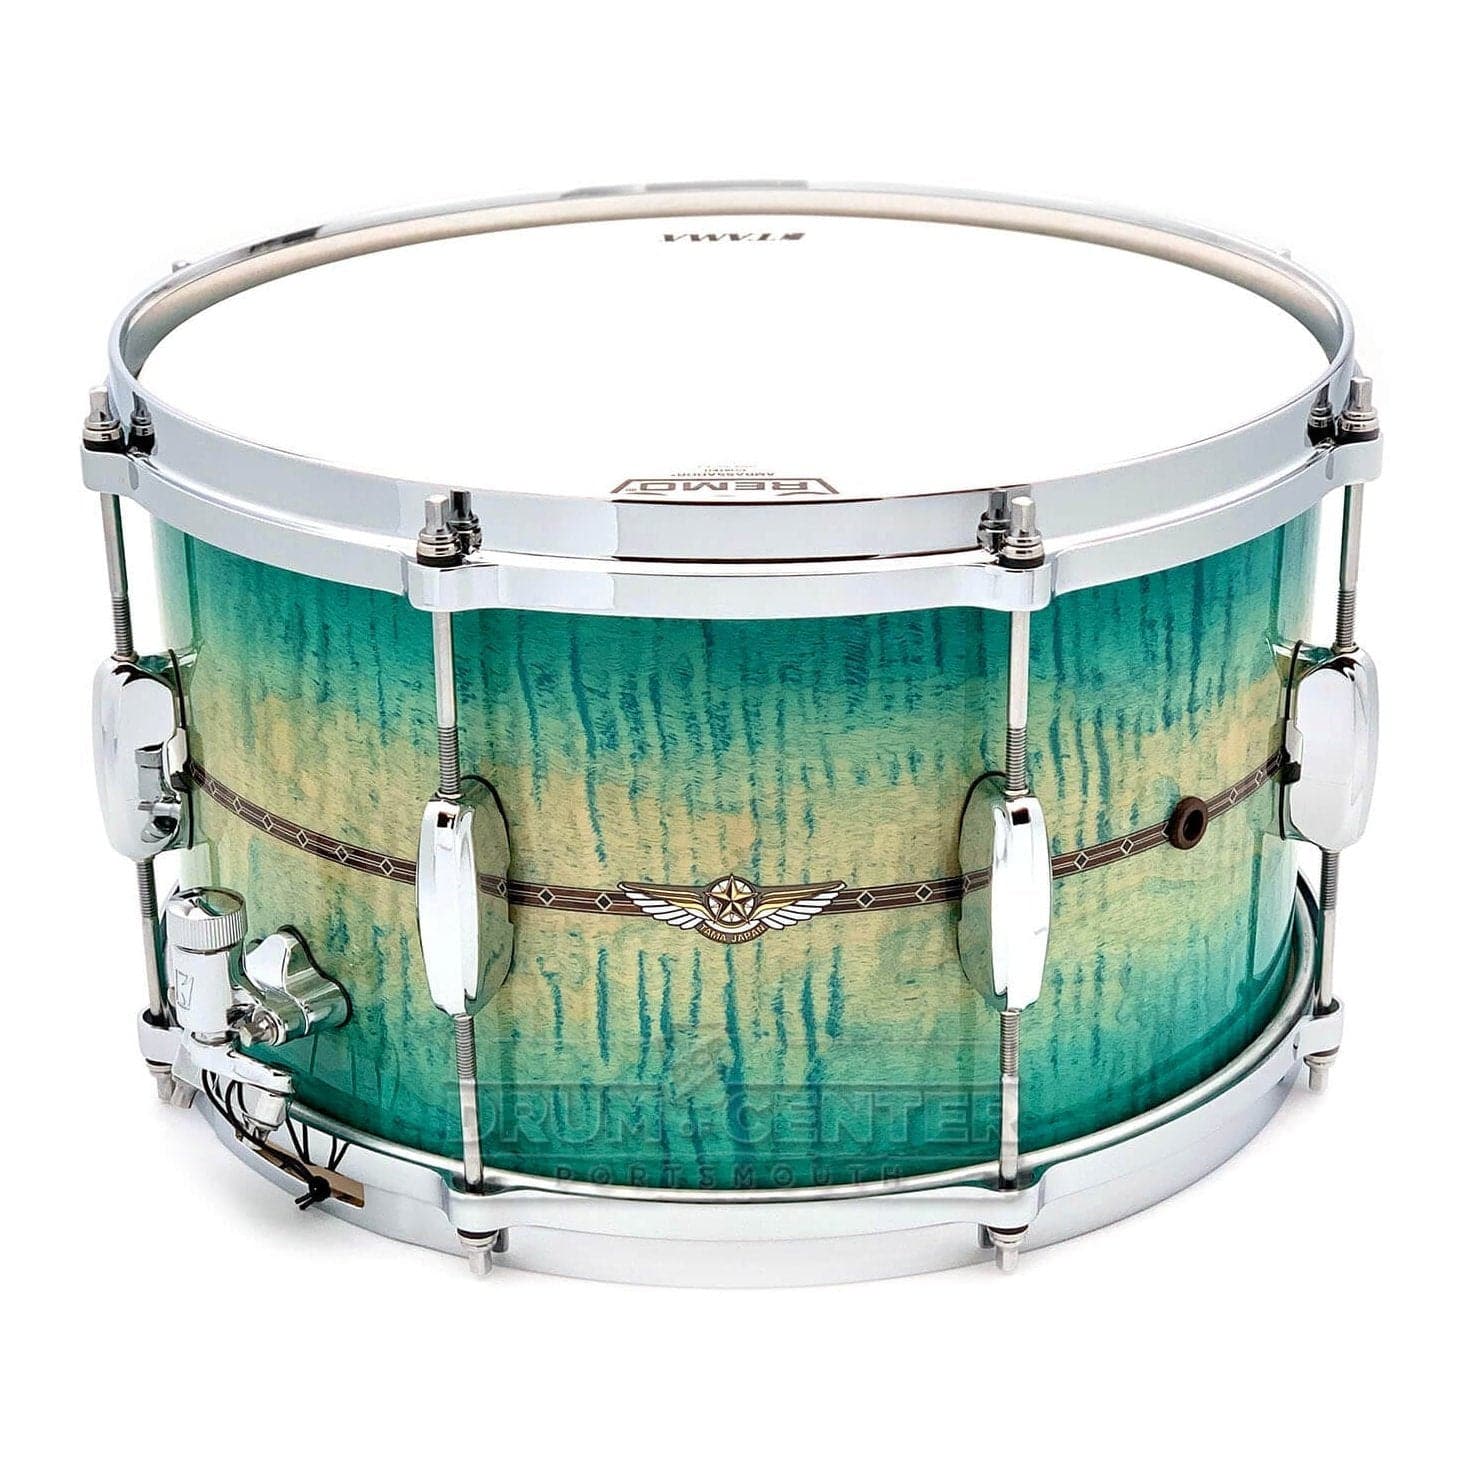 Tama Star Maple Snare Drum 14x8 Emerald Sea Curly Maple Burst w/Outer Inlay